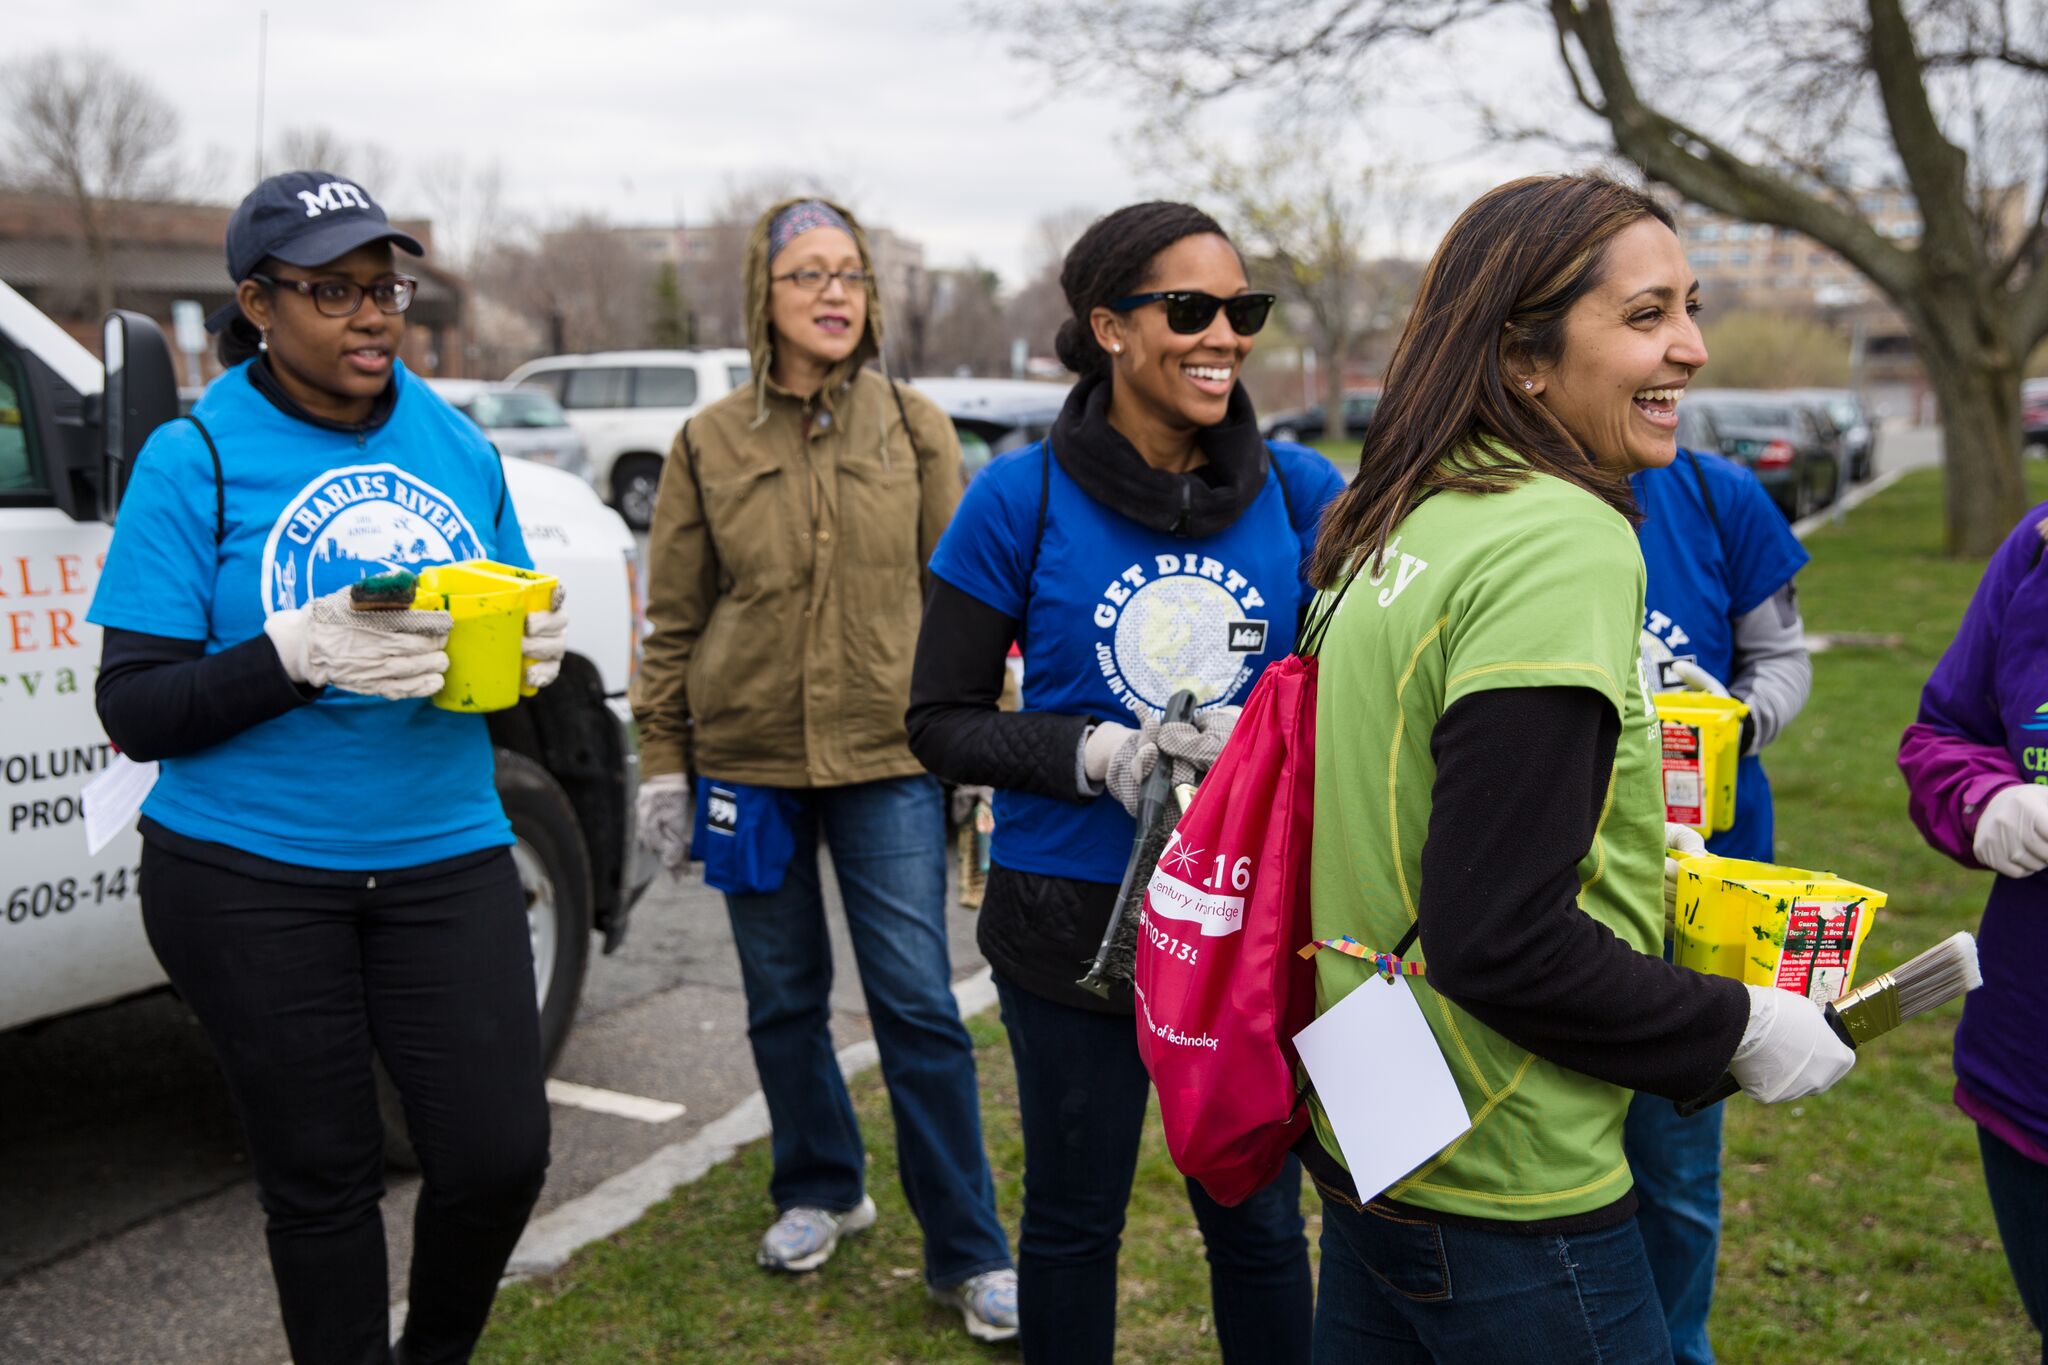 MIT volunteers prepare for a day of service